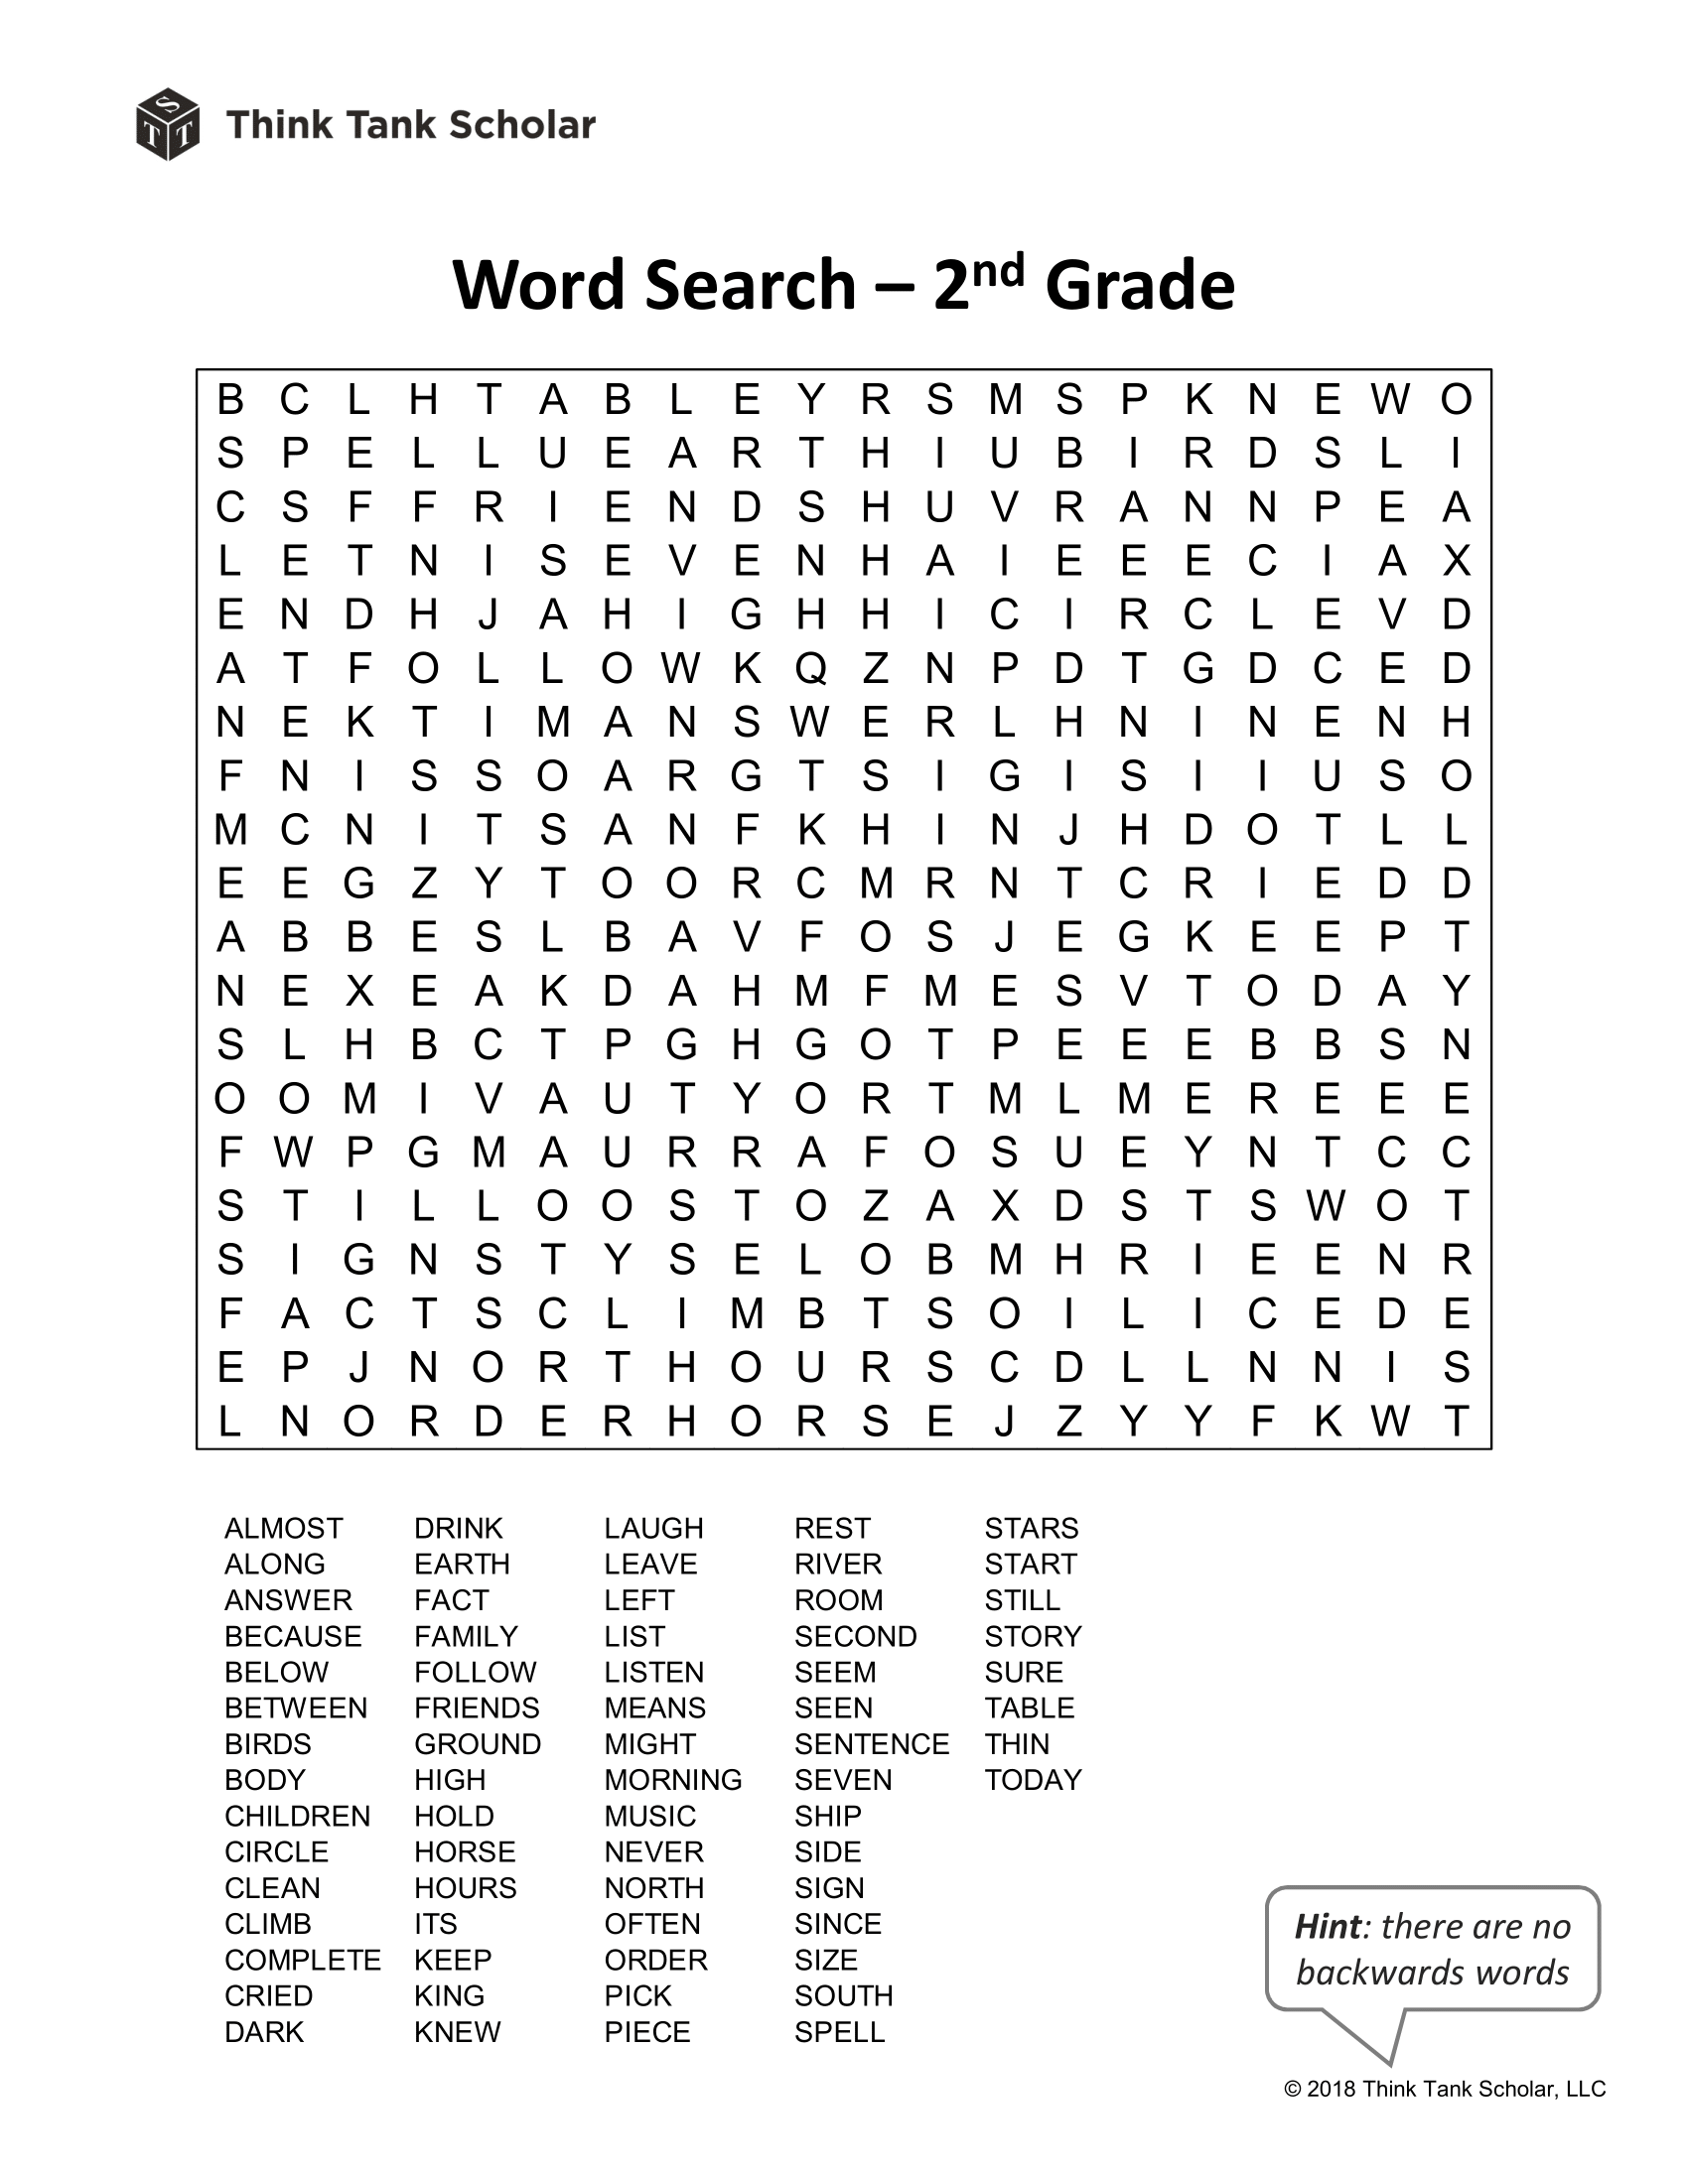 Sight Words Worksheet (FREE) Word Search 24nd Grade Printable Throughout 2nd Grade Sight Words Worksheet